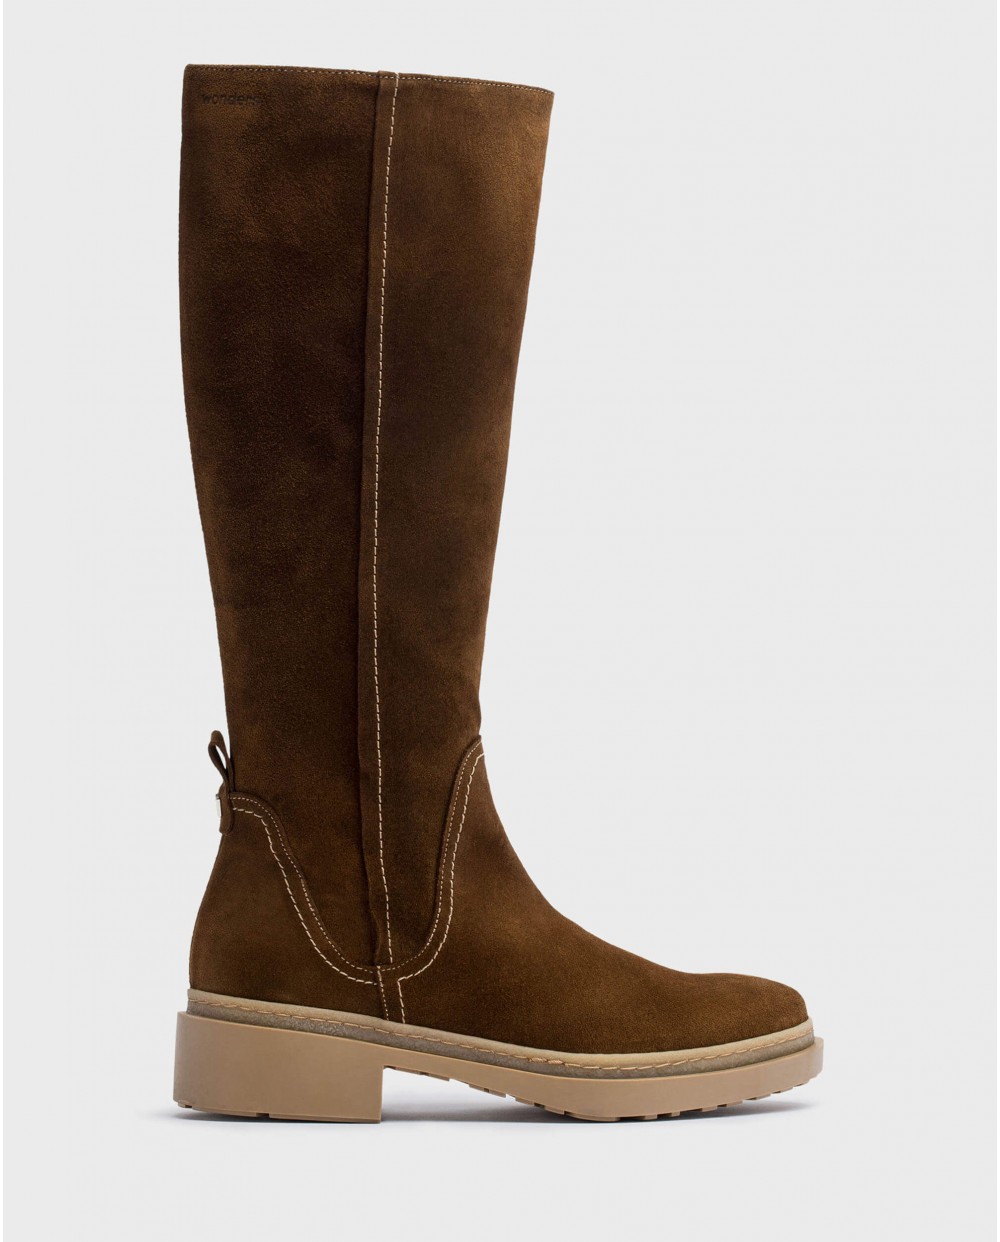 Wonders-Boots-Brown Roco Boot